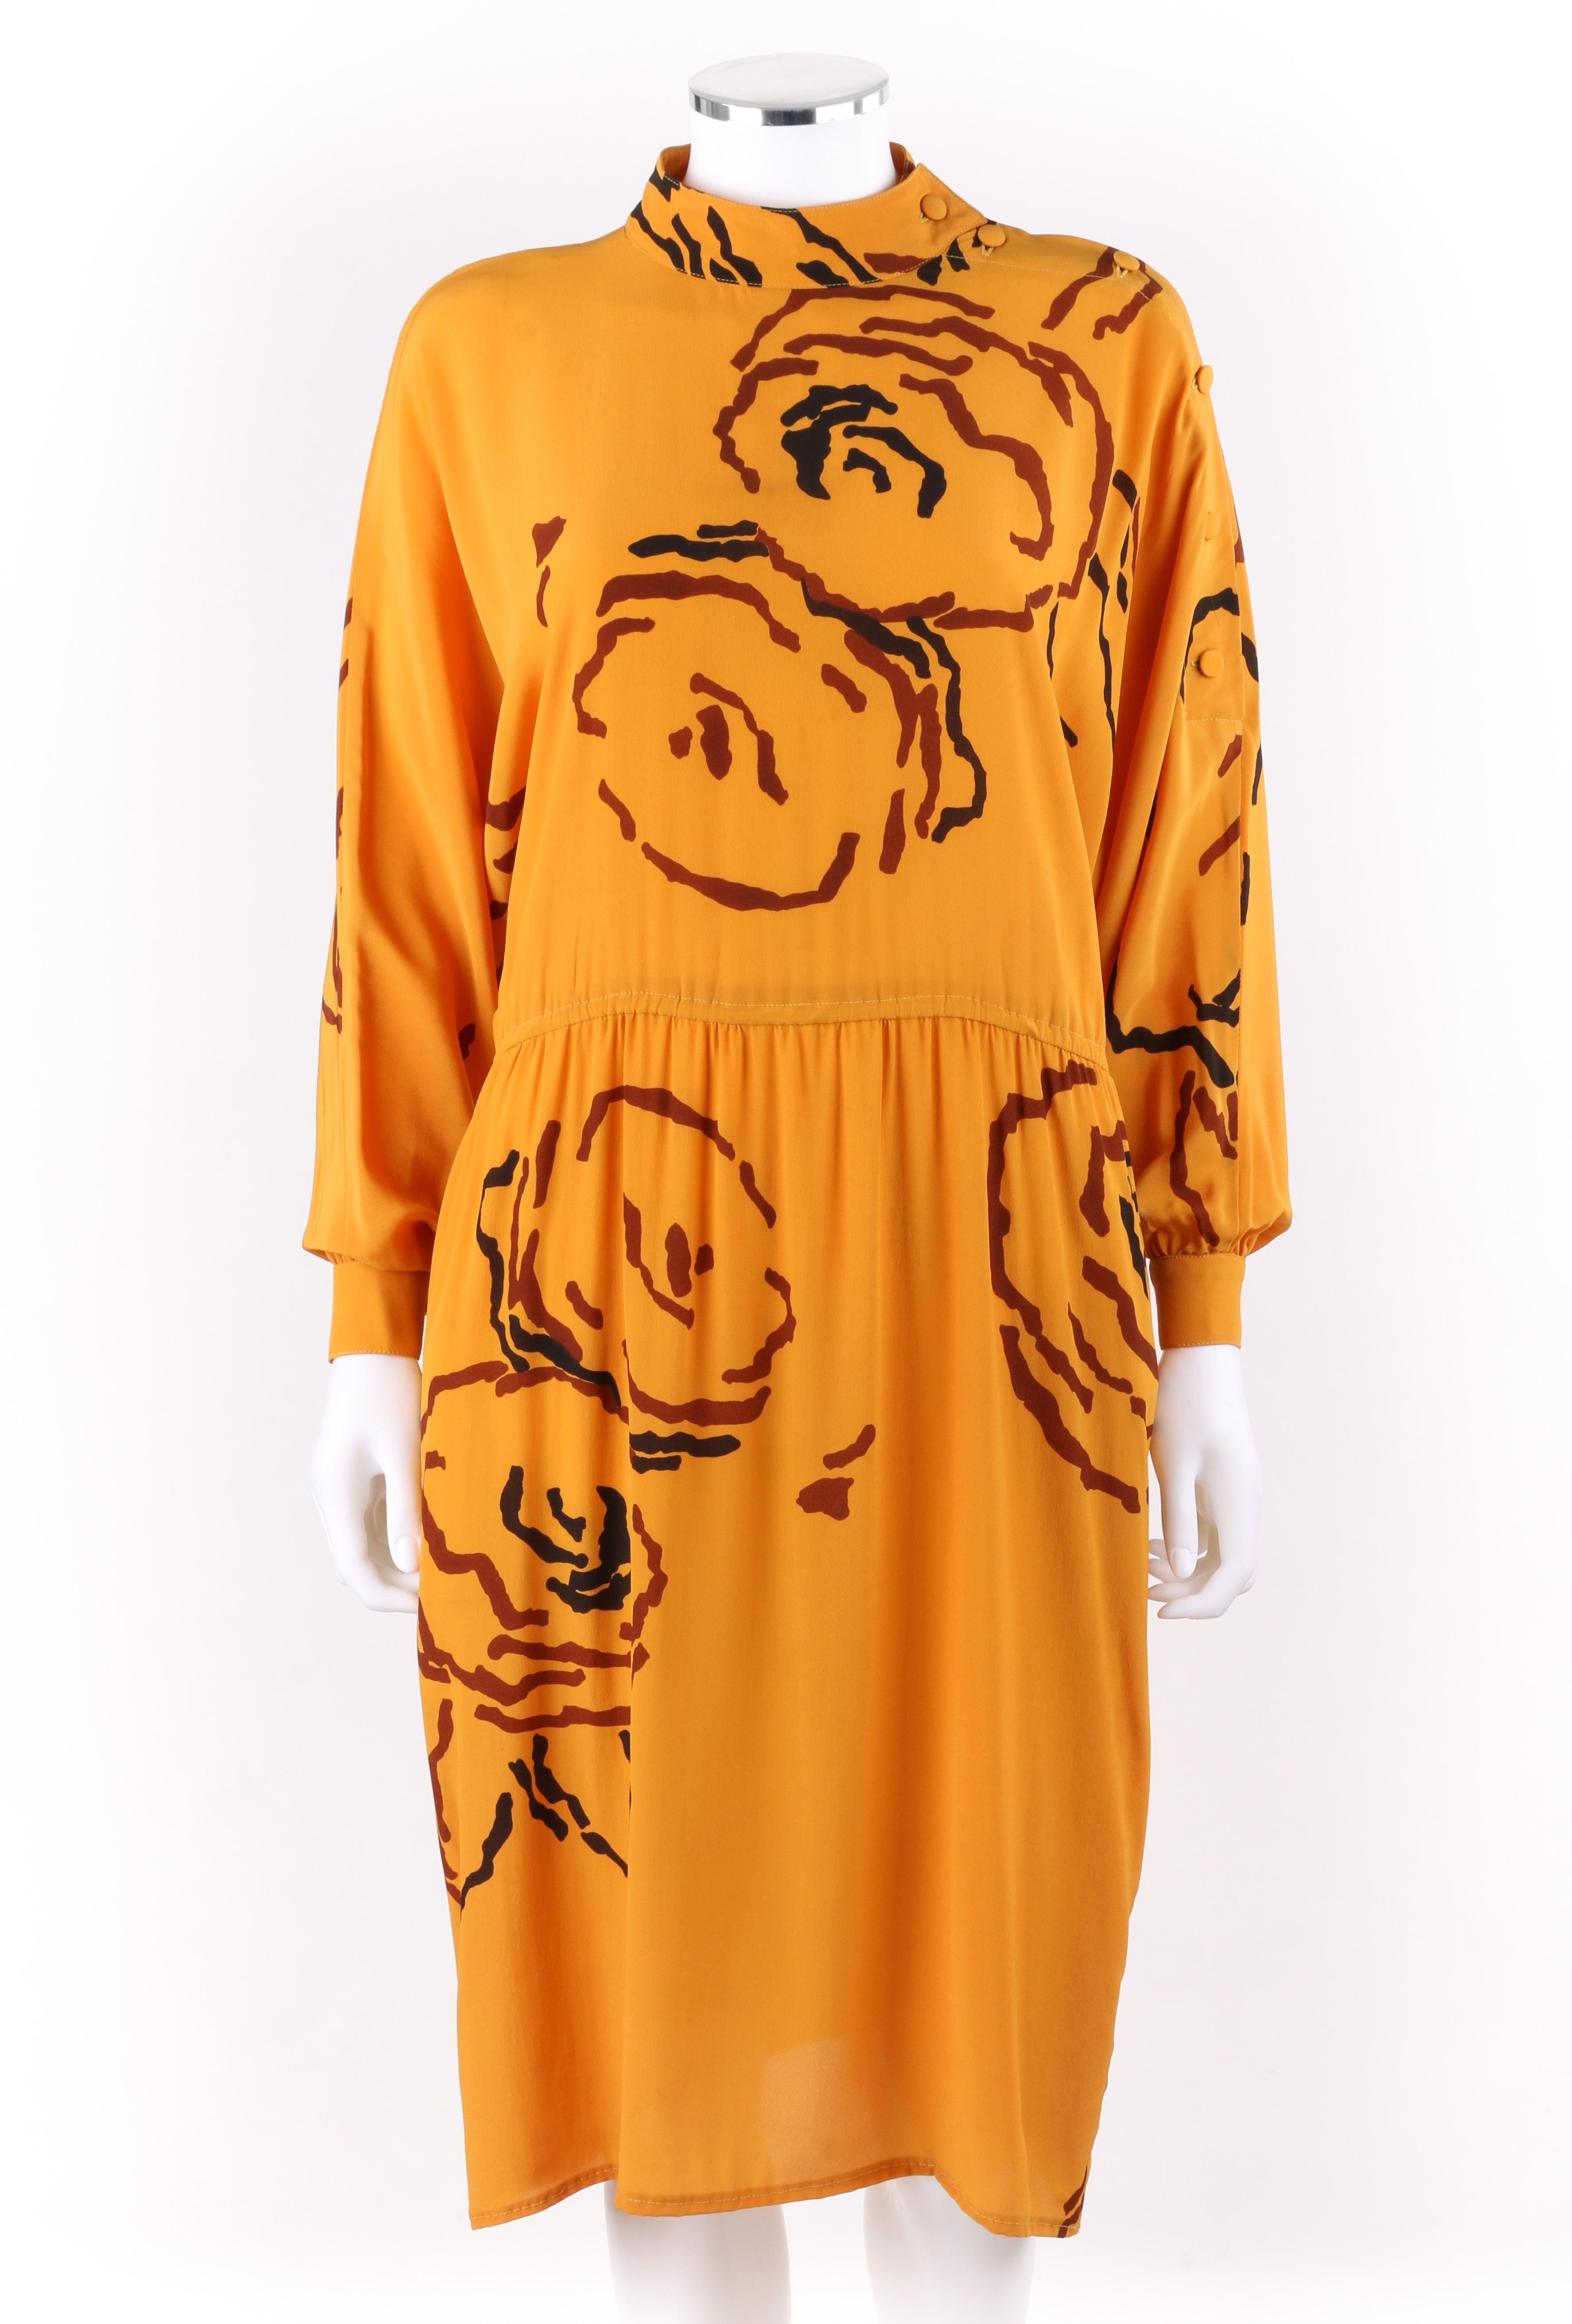 Vtg. TED LAPIDUS c.1980’s Saffron Orange Peony Floral Silk Long Sleeve Dress & Belt
 
Circa: 1980’s
Label(s): Ted Lapidus 
Style: Elasticized waist dress
Color(s): Shades of orange, brown and black 
Lined: No
Marked Fabric Content: 68% Acetate, 32%